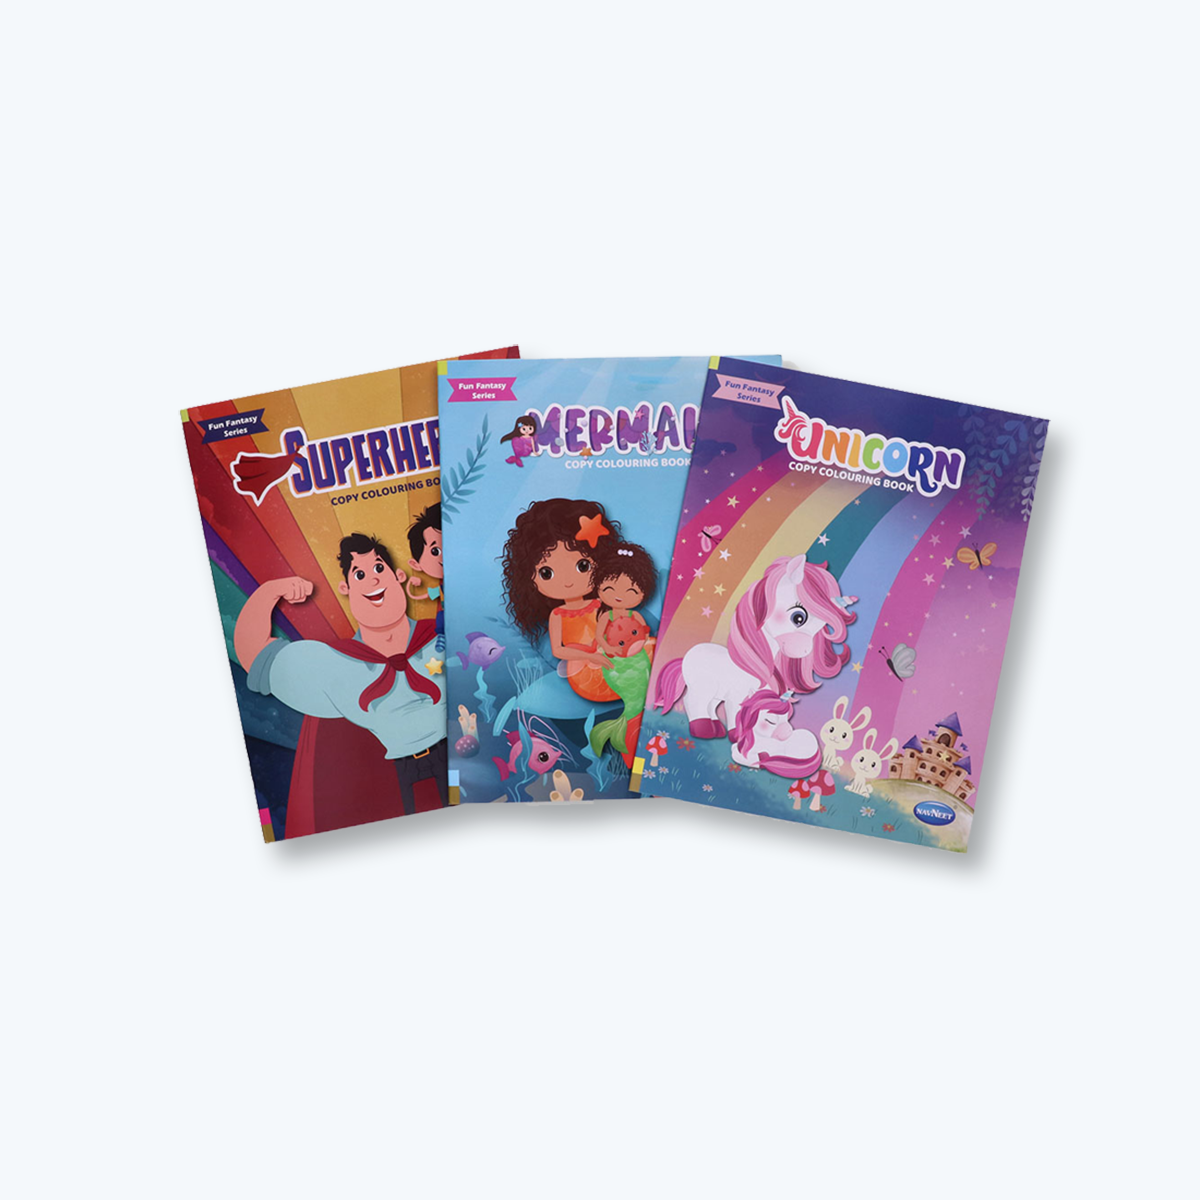 Navneet Fun Fantasy Series Copy Colouring Book - Set of 3 books - Unicorn, Mermaid, Superheroes - Painting and colouring books for kids- Youva Stationery- 40+ pages